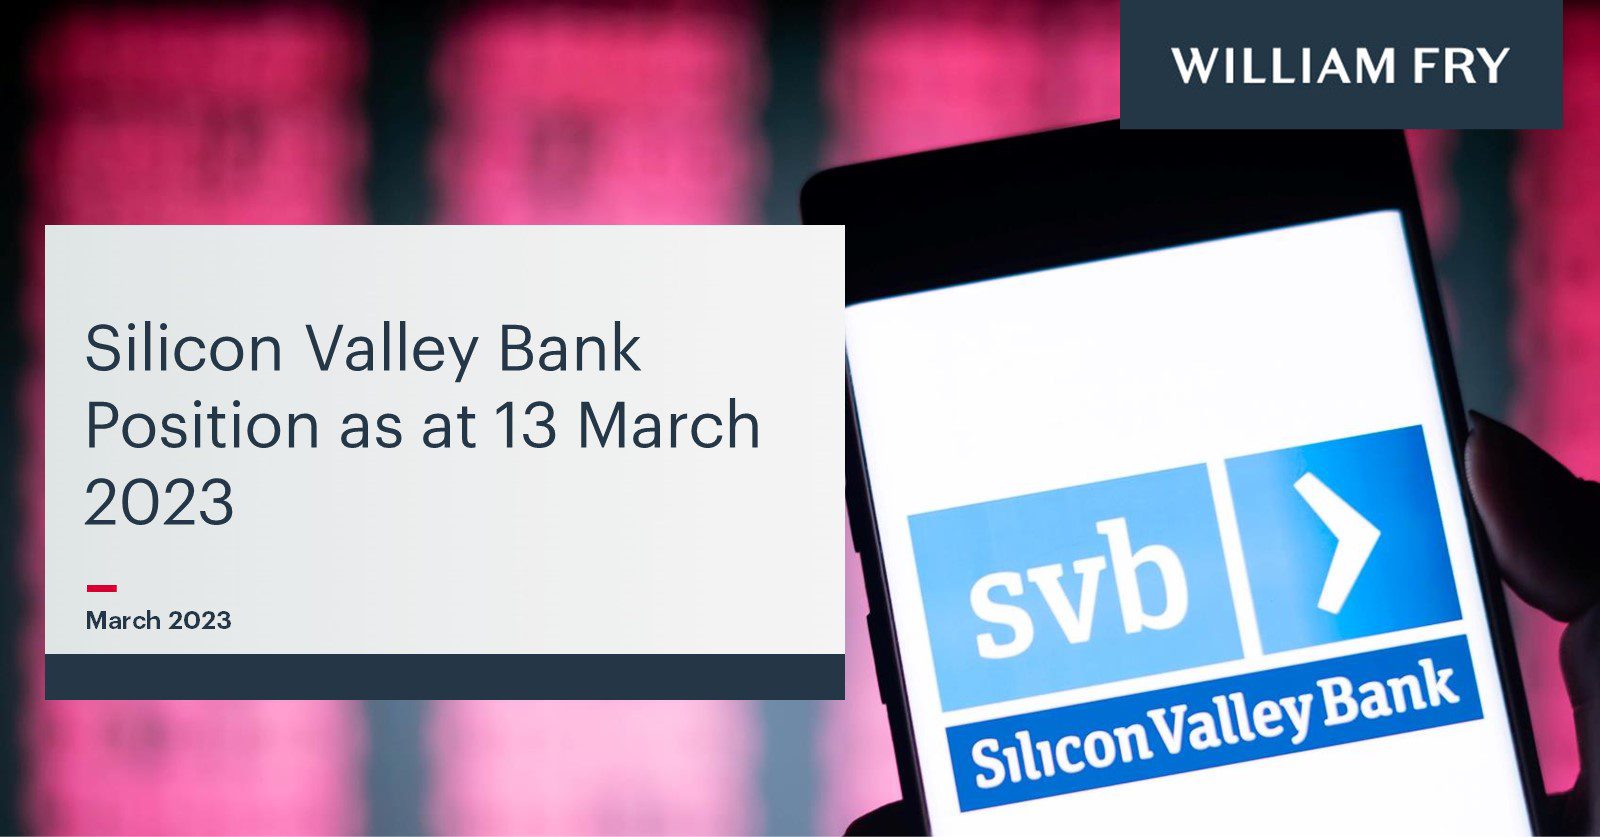 Silicon Valley Bank Position as at 13 March 2023